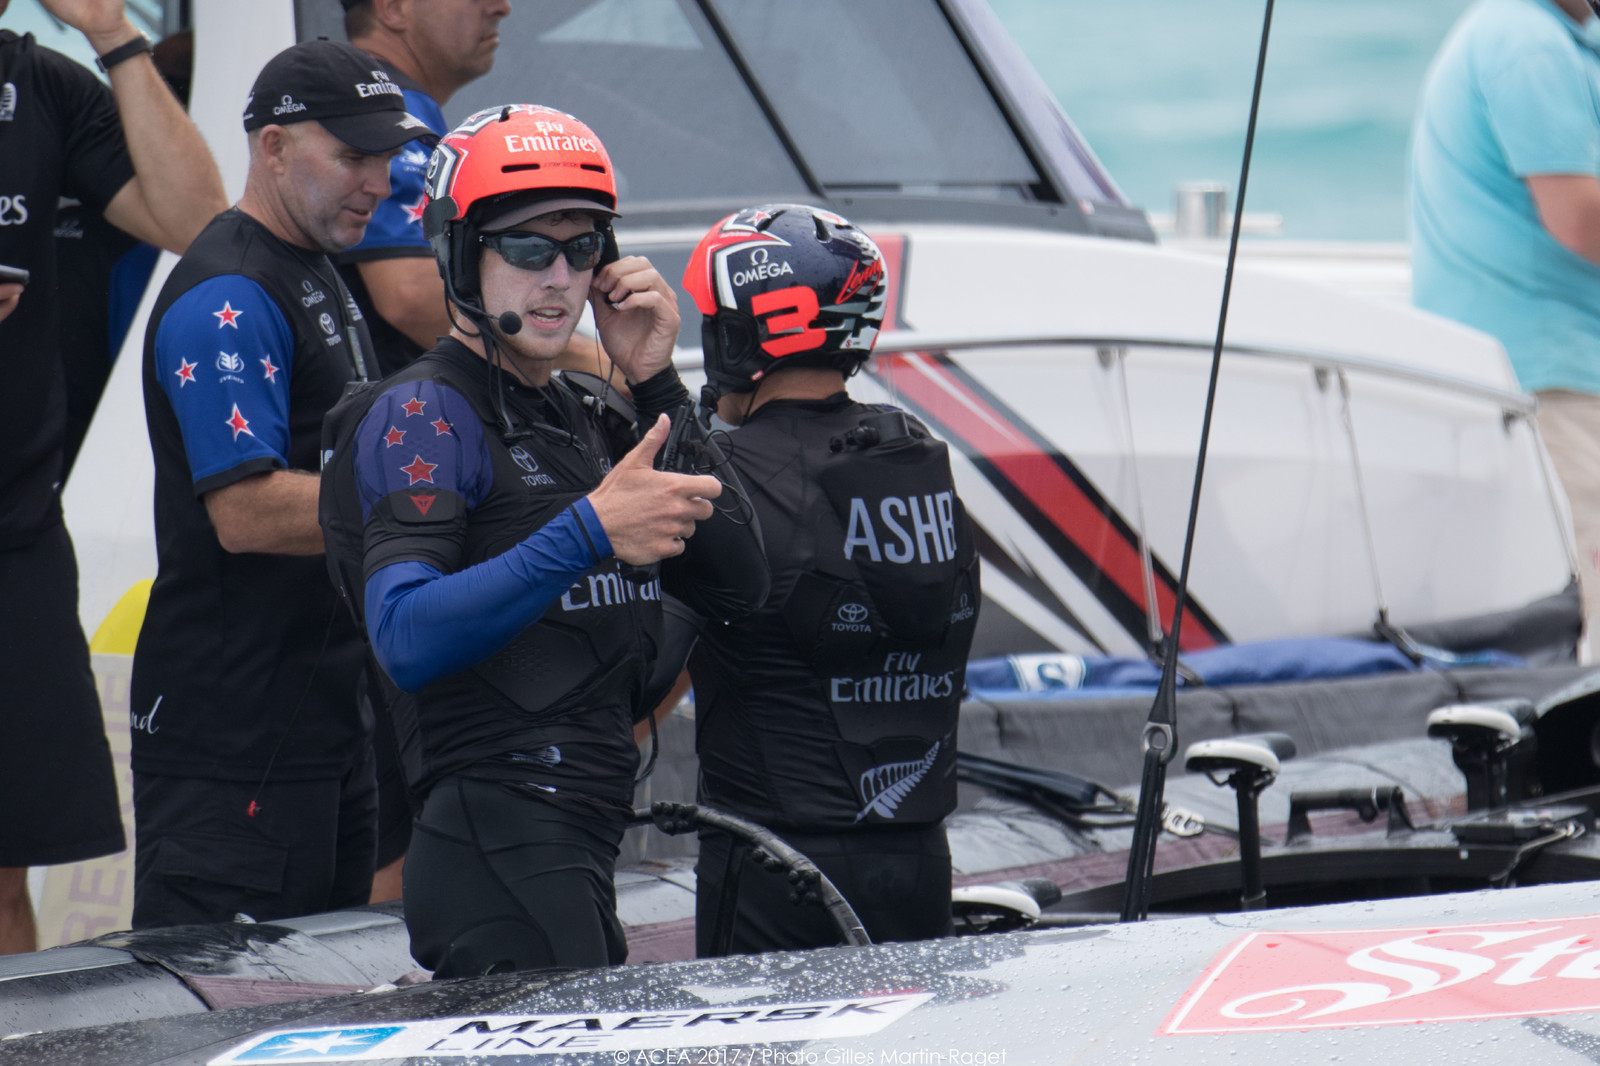 35th America's Cup Bermuda 2017 - Louis Vuitton America's Cup Qualifiers, Day 7